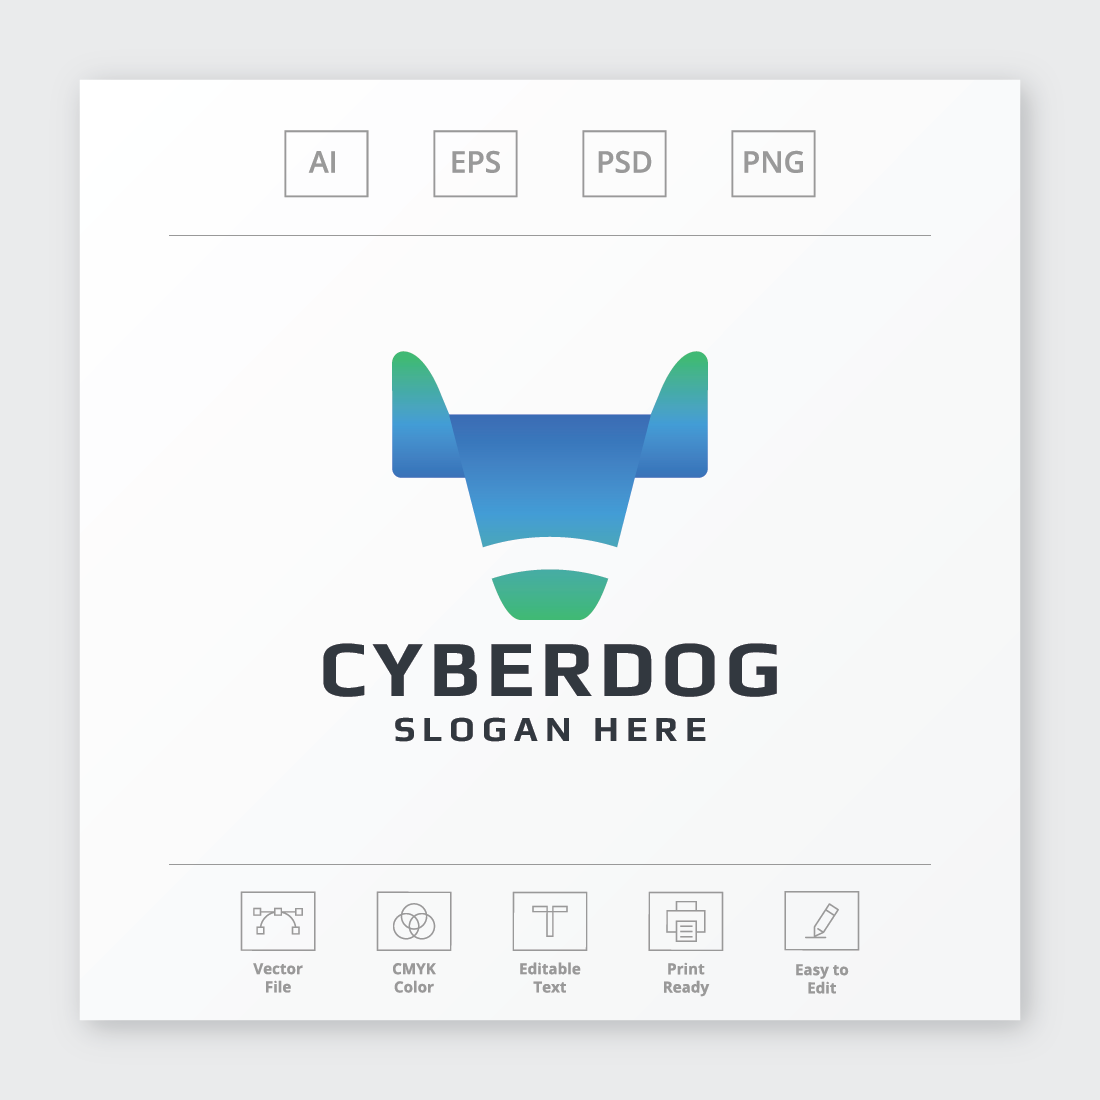 Cyber Dog Security Logo cover image.